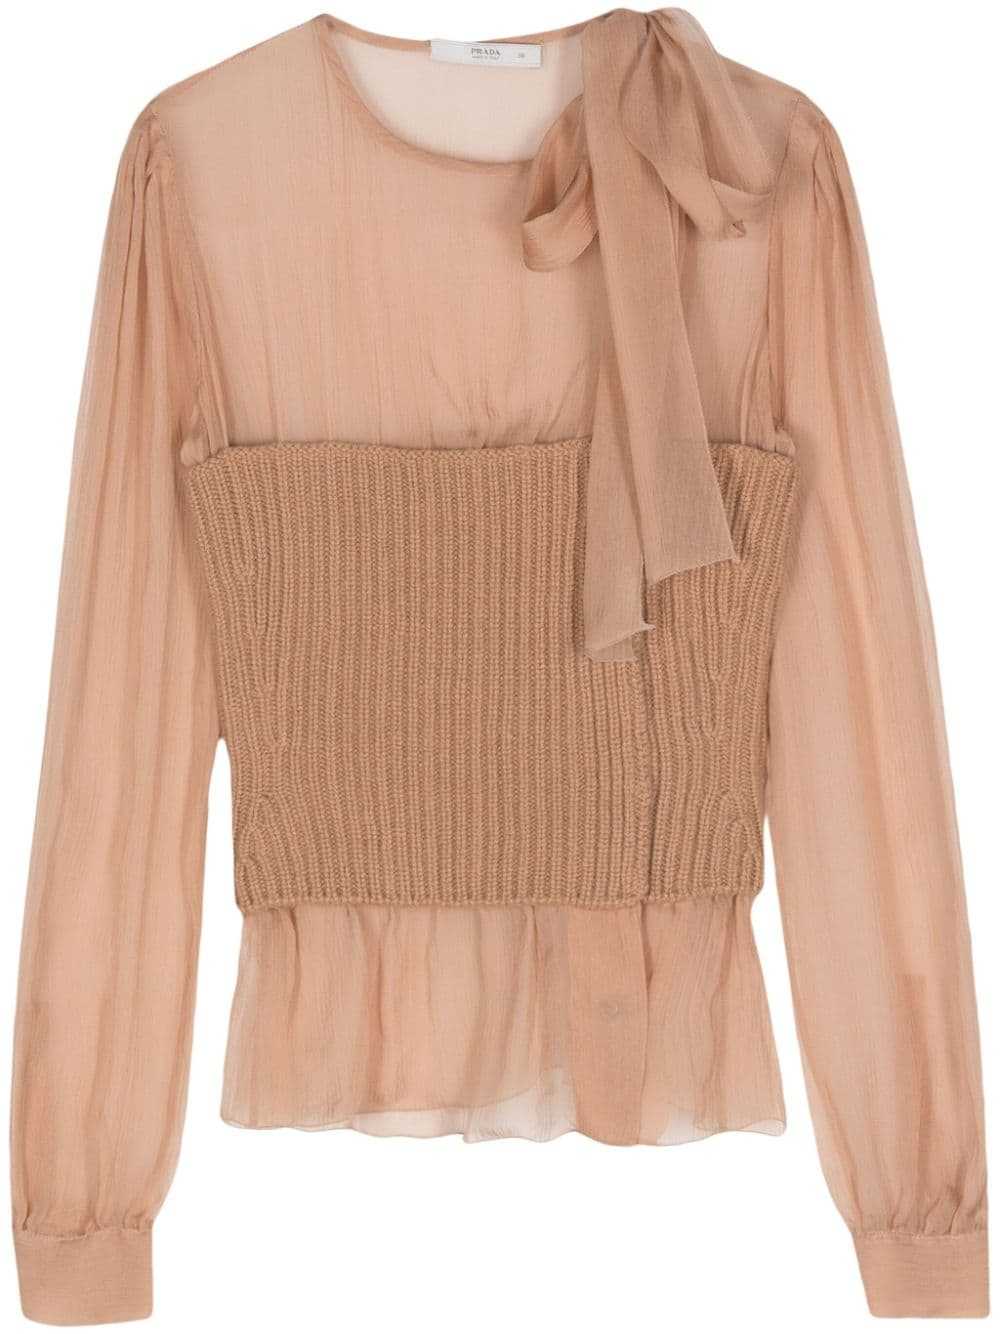 Prada Pre-Owned 2010s panelled blouse - Neutrals - image 1